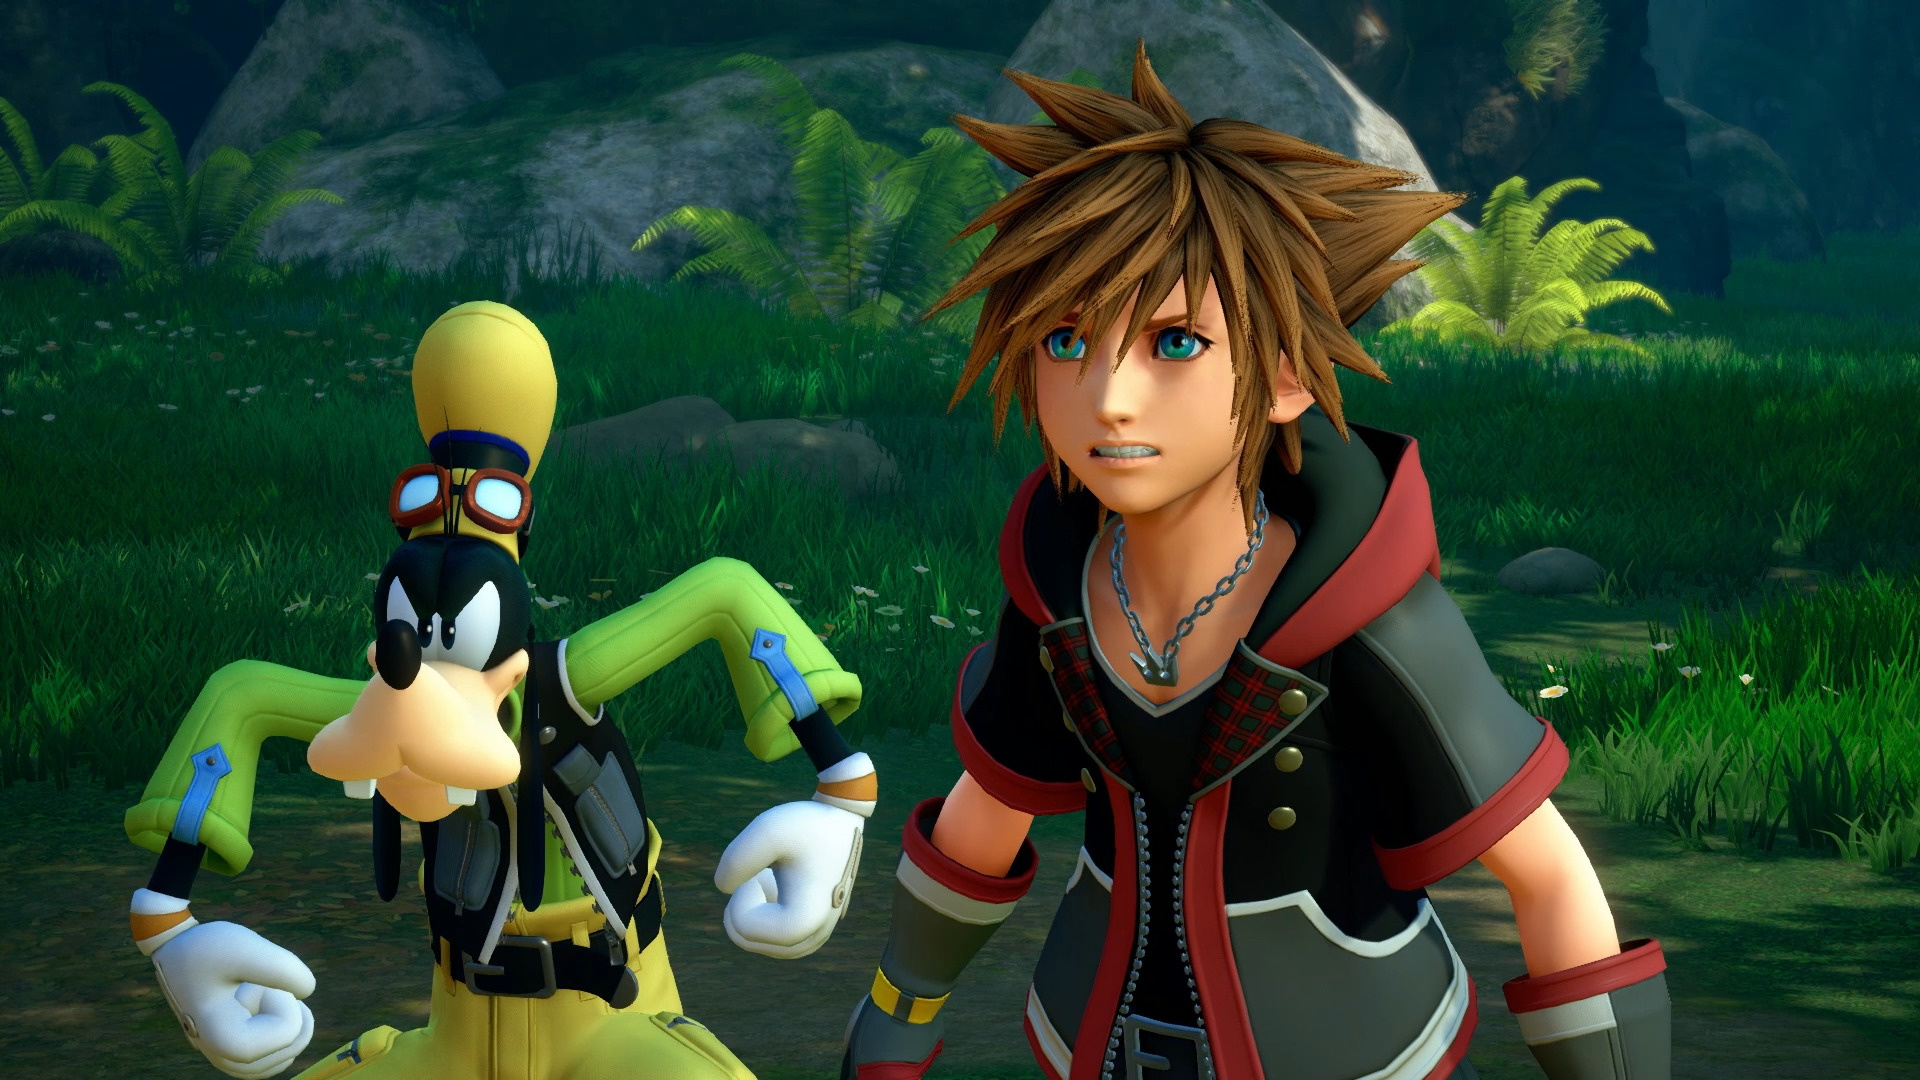 Kingdom Hearts III For PlayStation 4 PS4 PS5 RPG